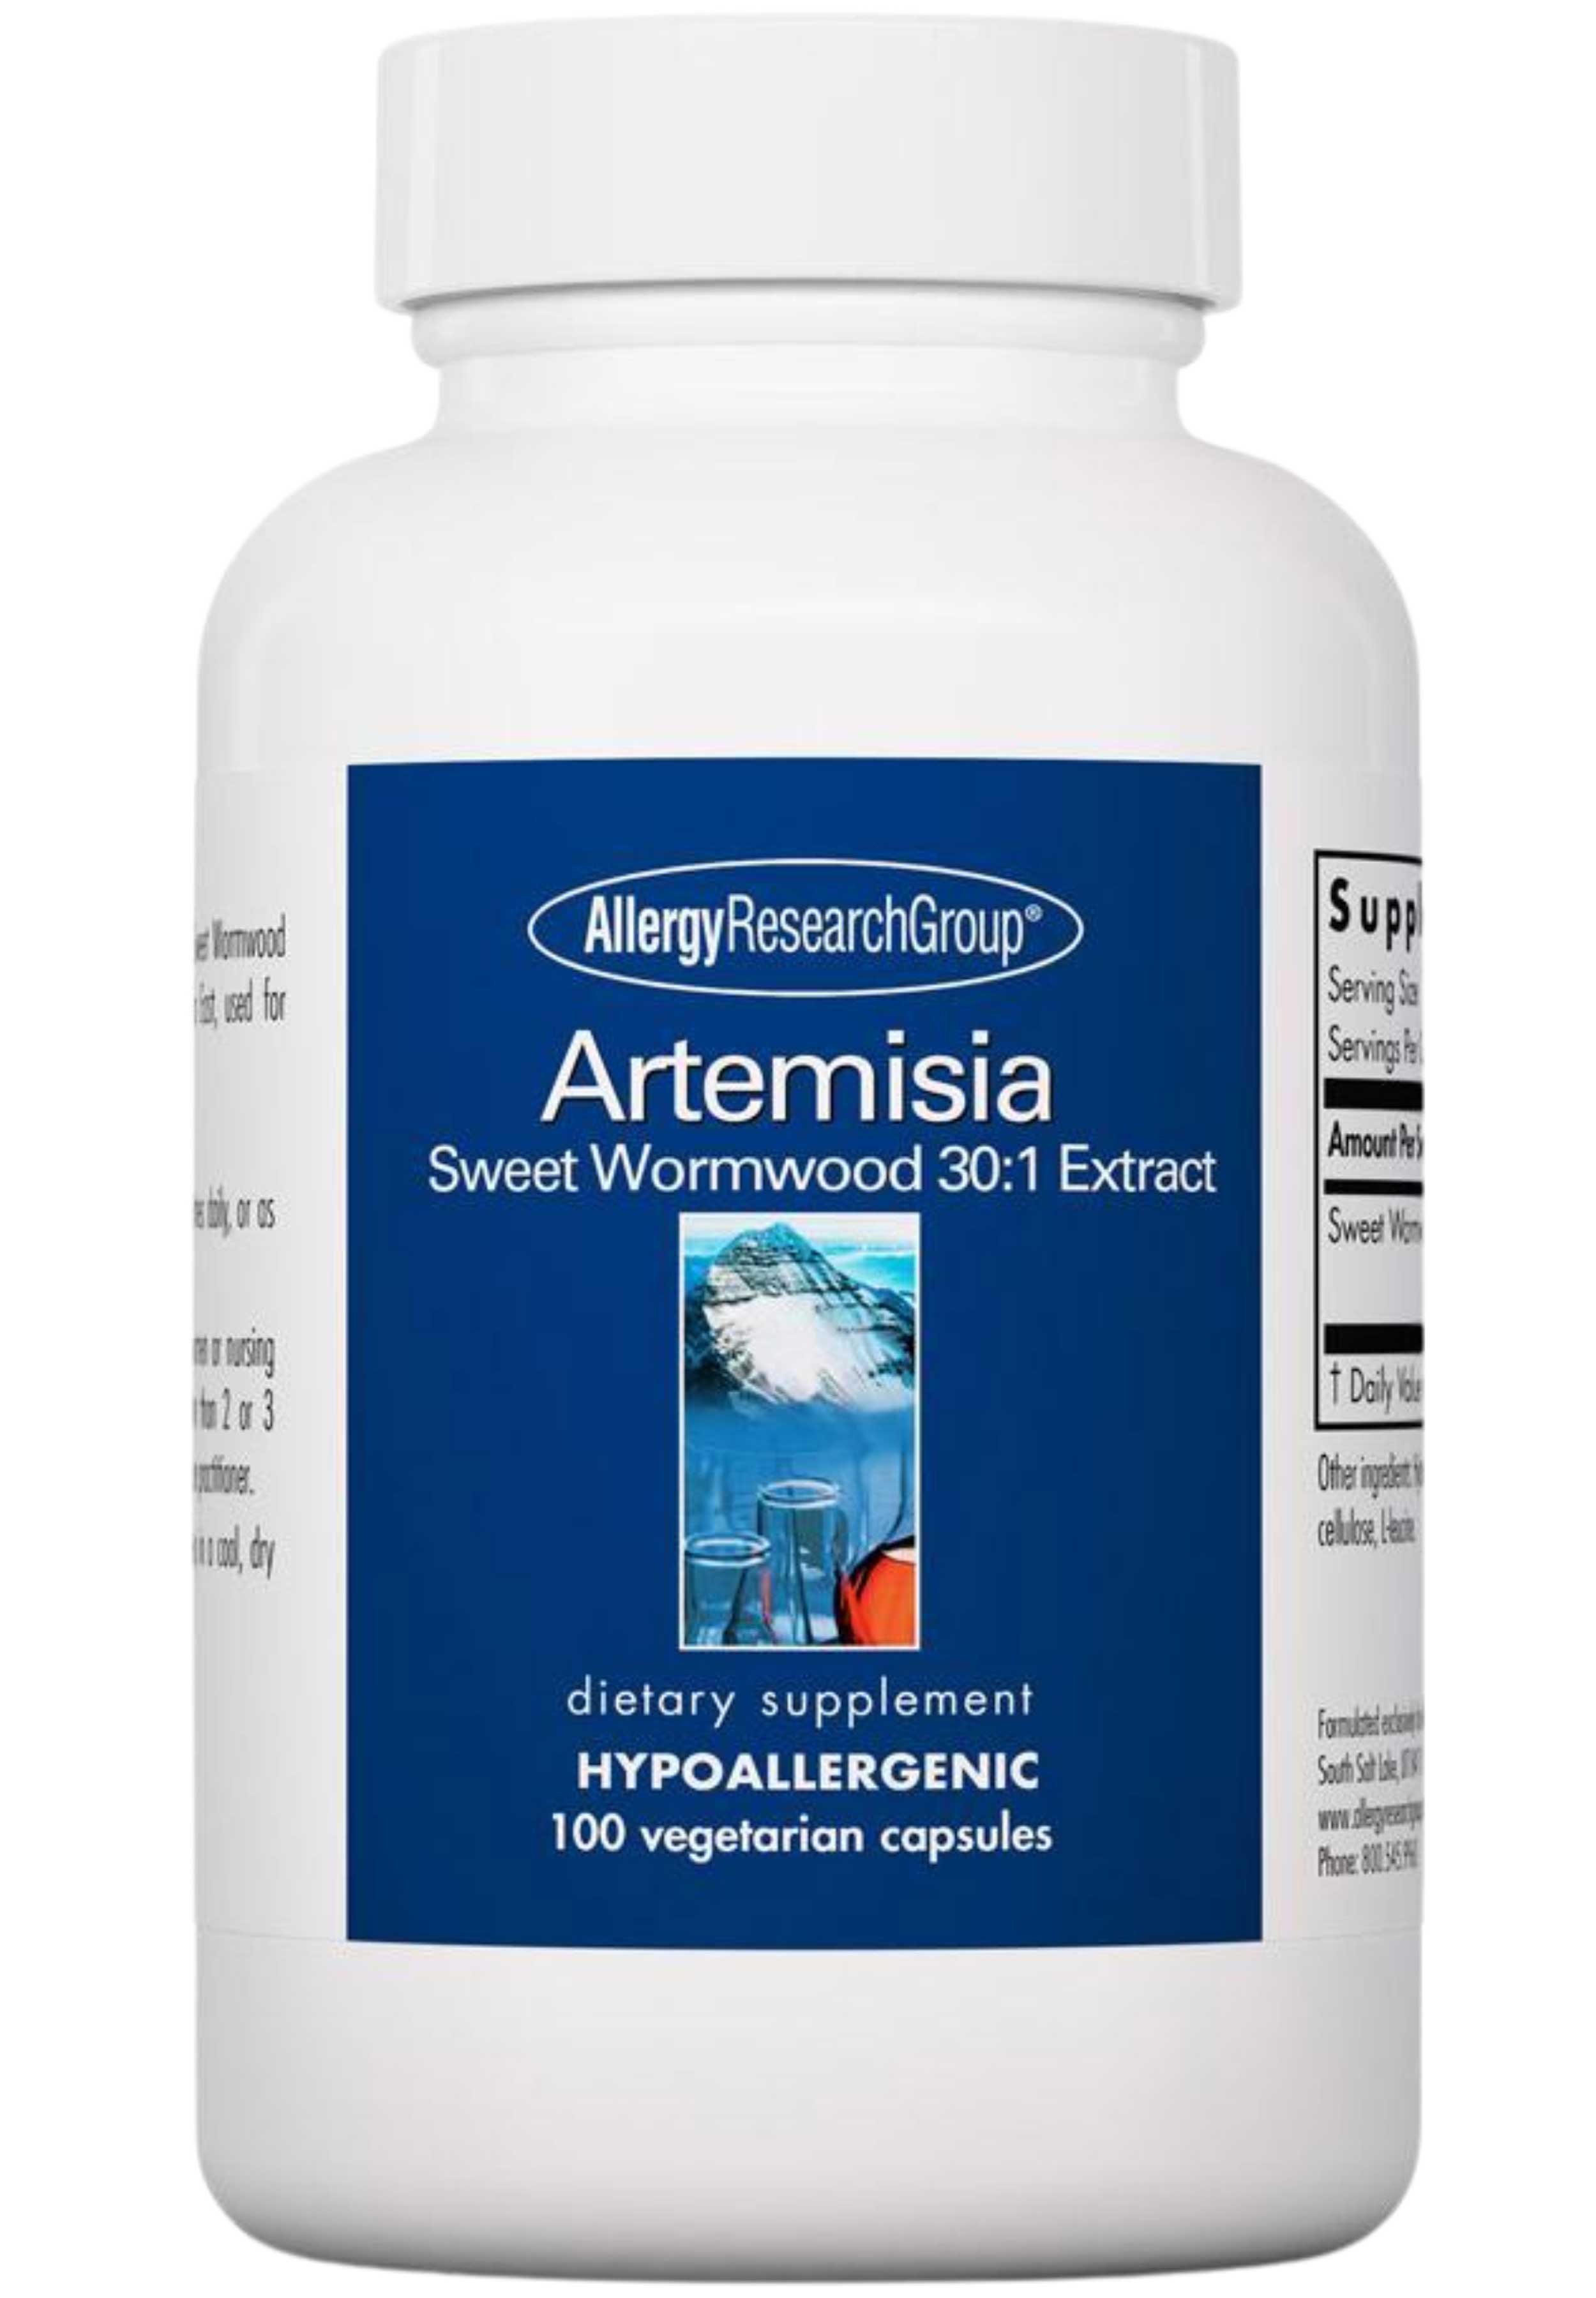 Allergy Research Group Artemisia